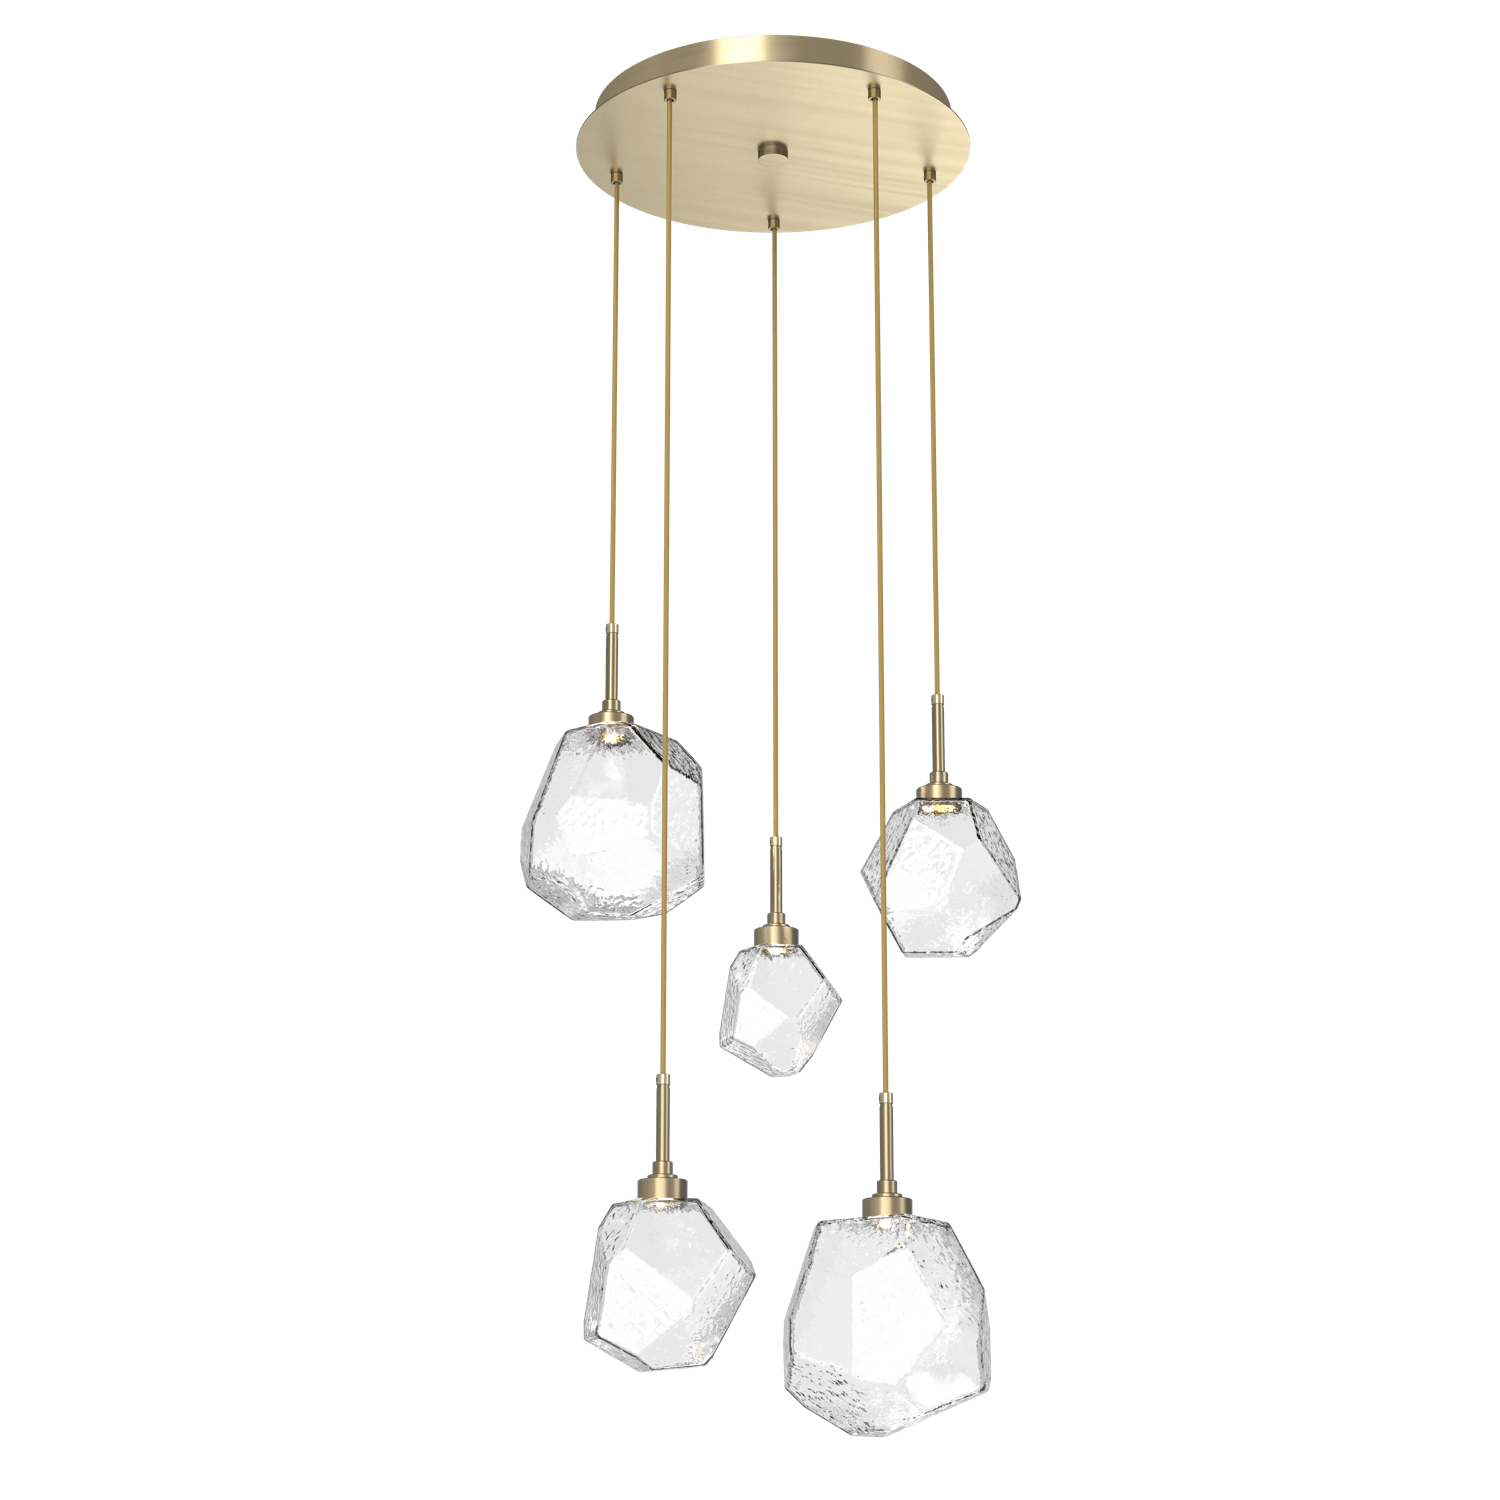 CHB0039-05-HB-C-Hammerton-Studio-Gem-5-light-round-pendant-chandelier-with-heritage-brass-finish-and-clear-blown-glass-shades-and-LED-lamping